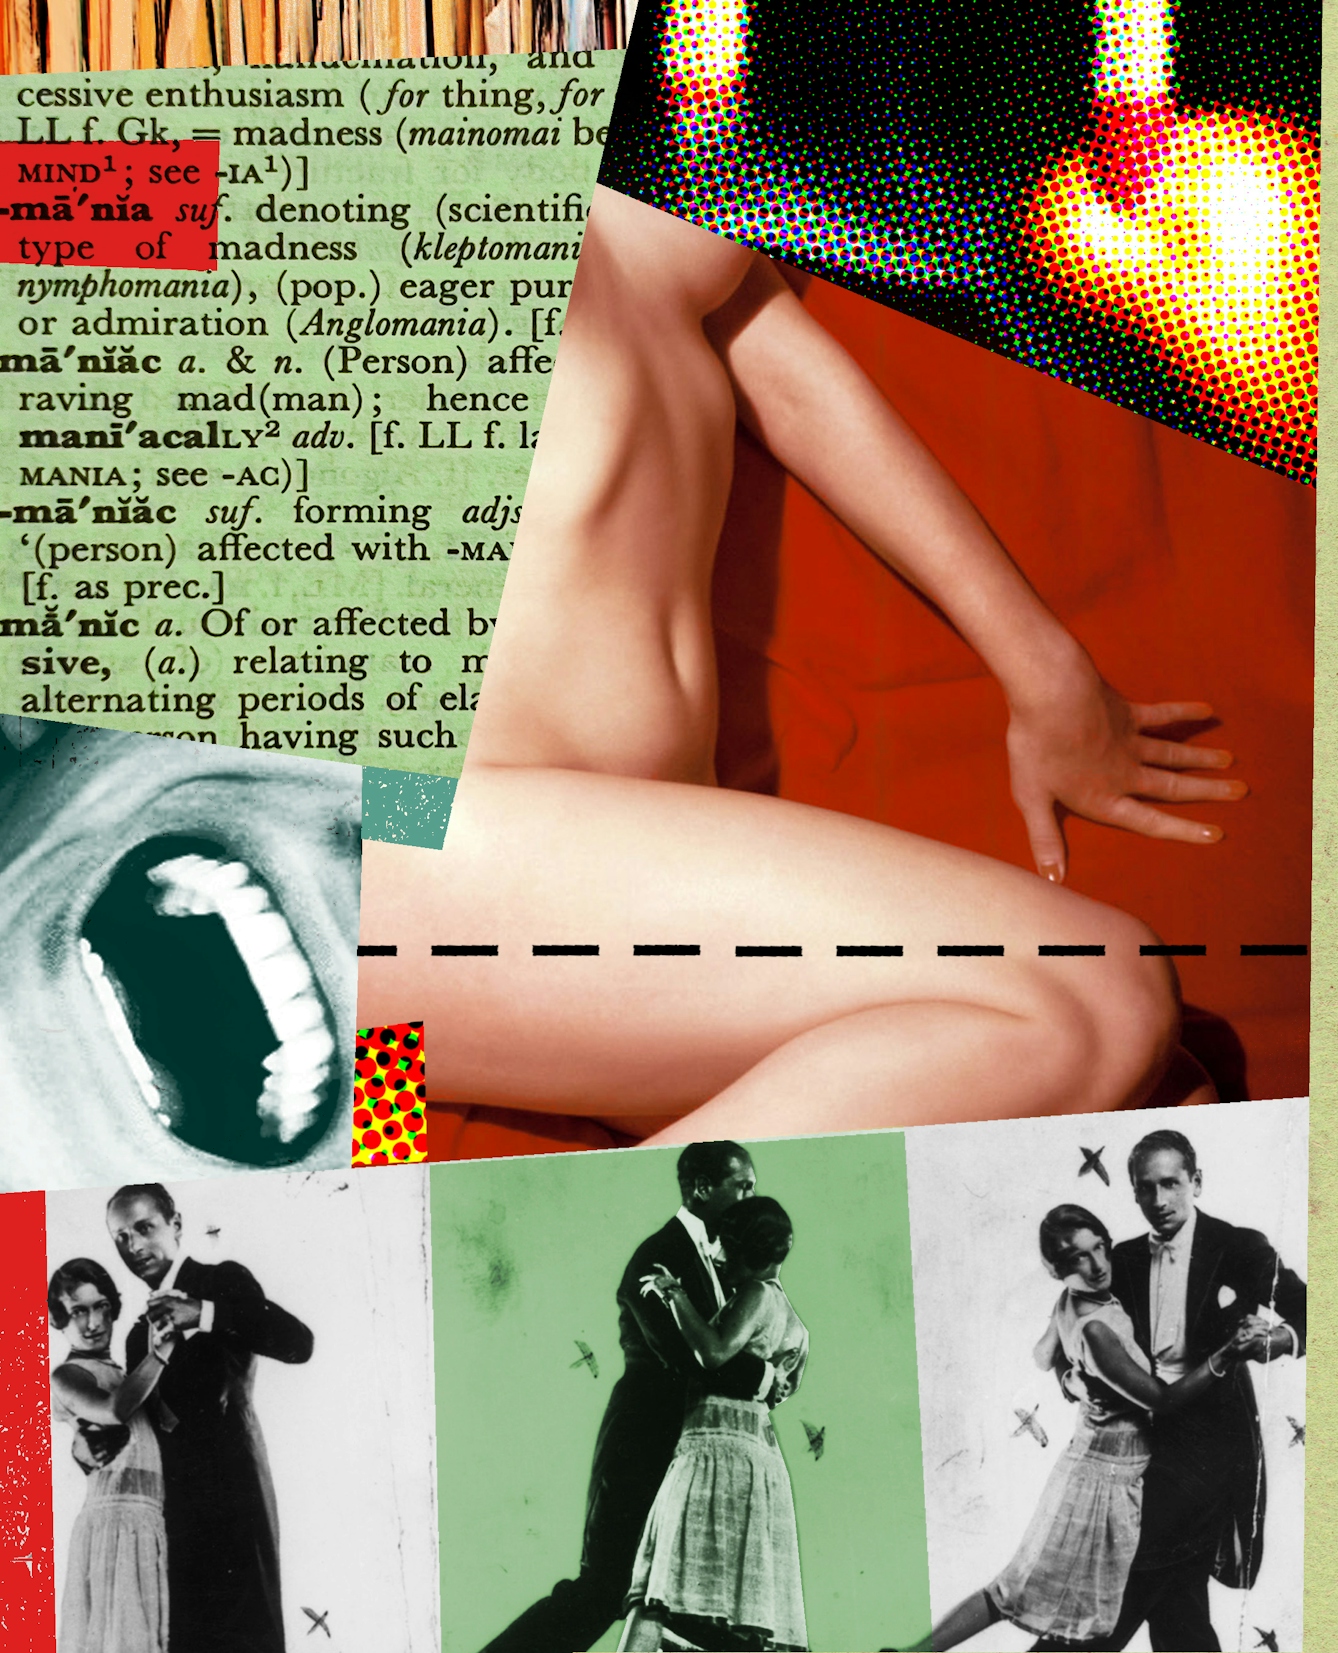 Detail from a larger digital montage artwork made up of archive illustrations, photographs and graphical shapes. The overall hues of the artwork are reds, greens and blacks. There are a number of references across the artwork including a definition of mania taken from a dictionary, a series of photographs of a couple dancing and a half revealed photograph of a naked woman's torso.